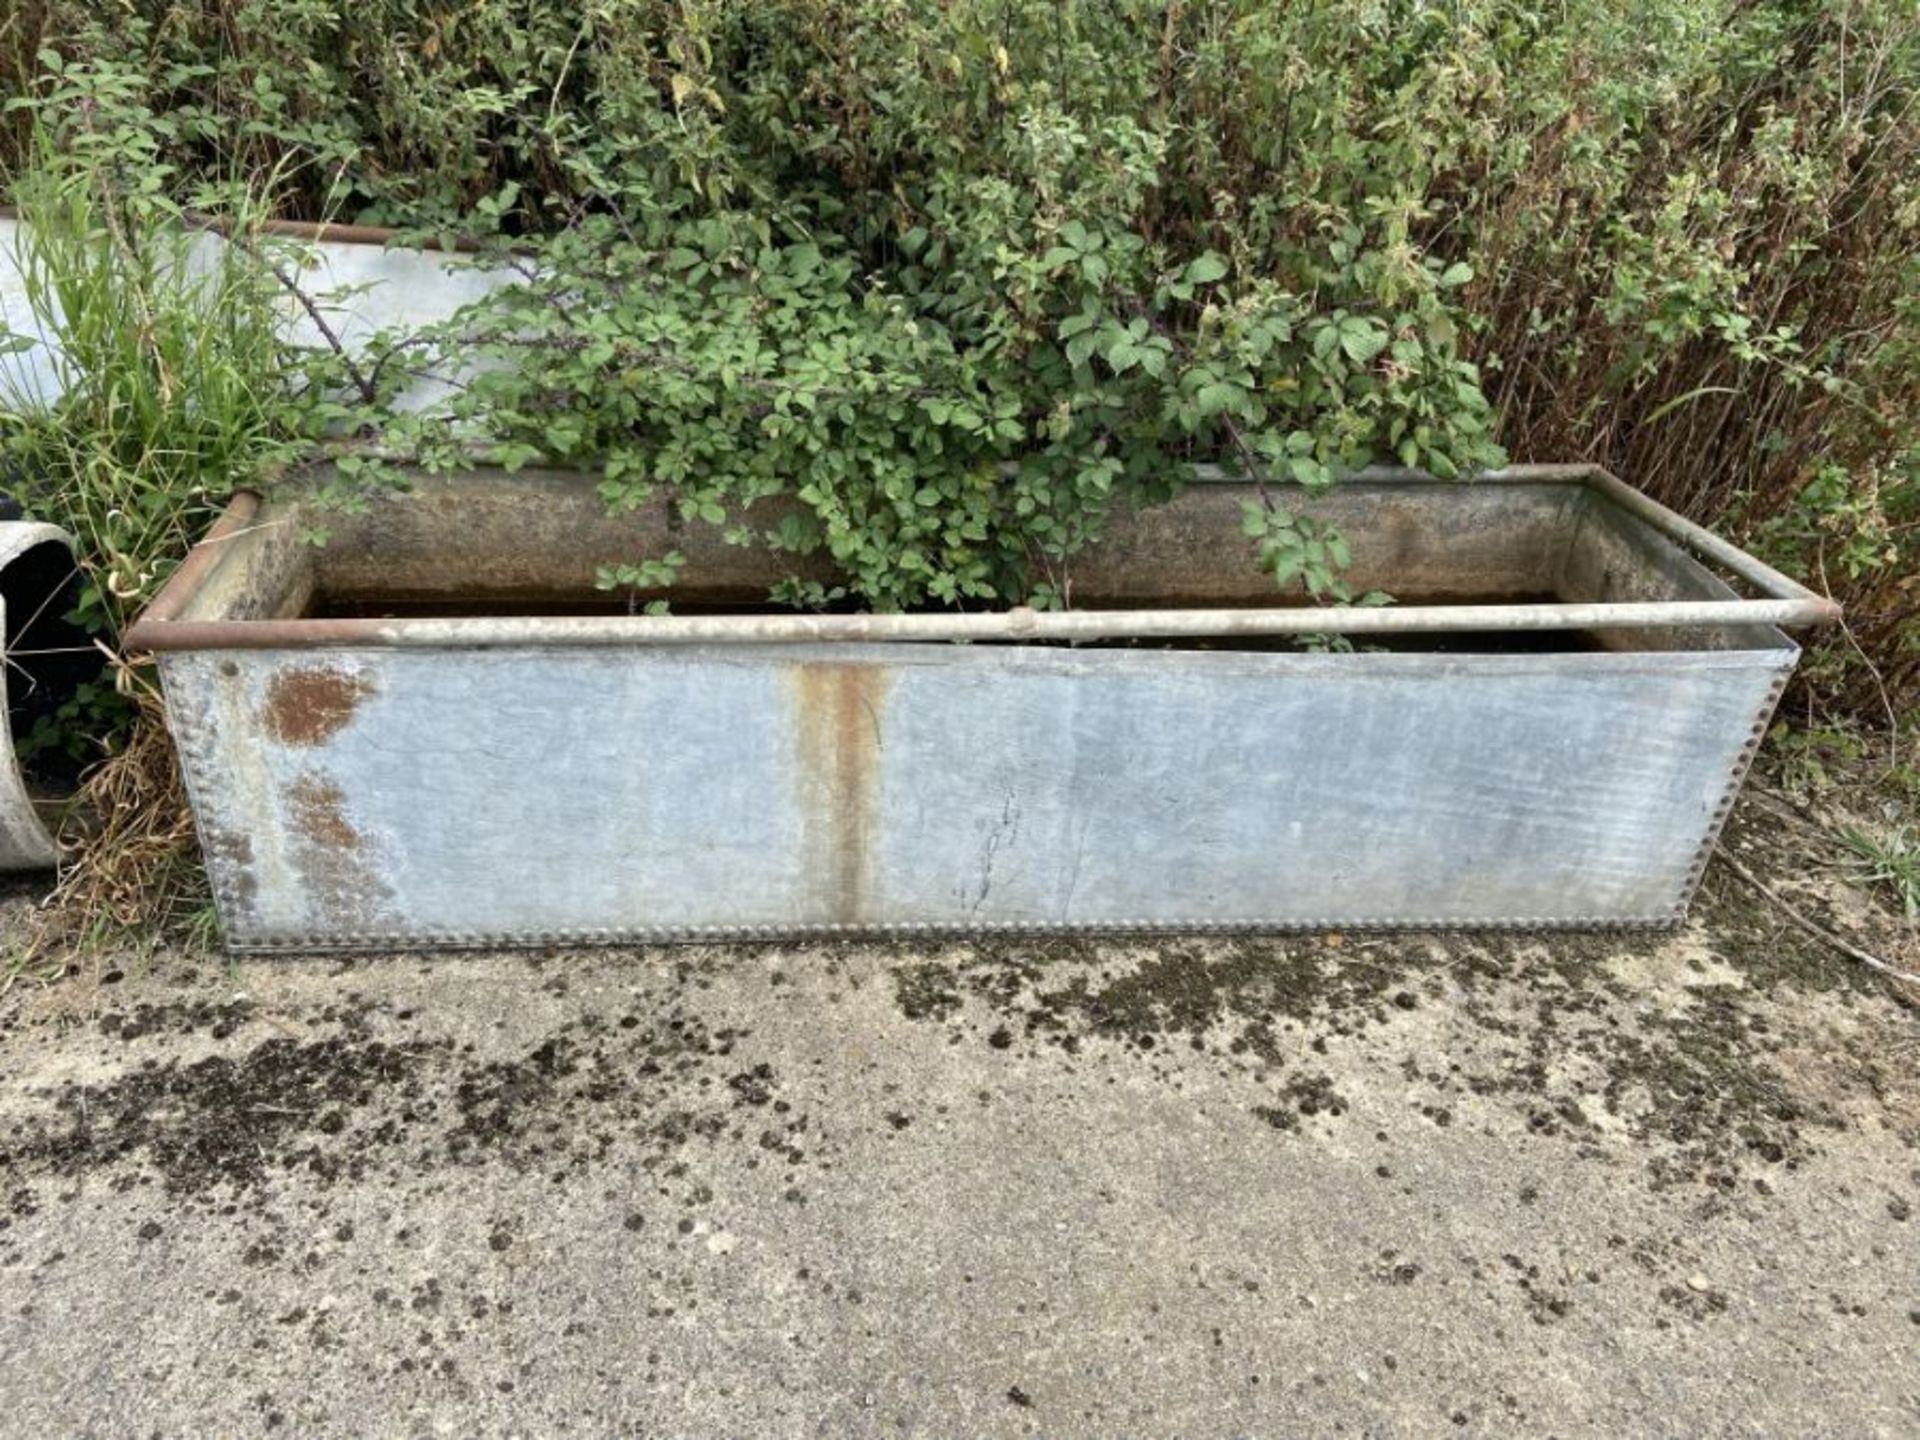 Galvanised water trough, studded